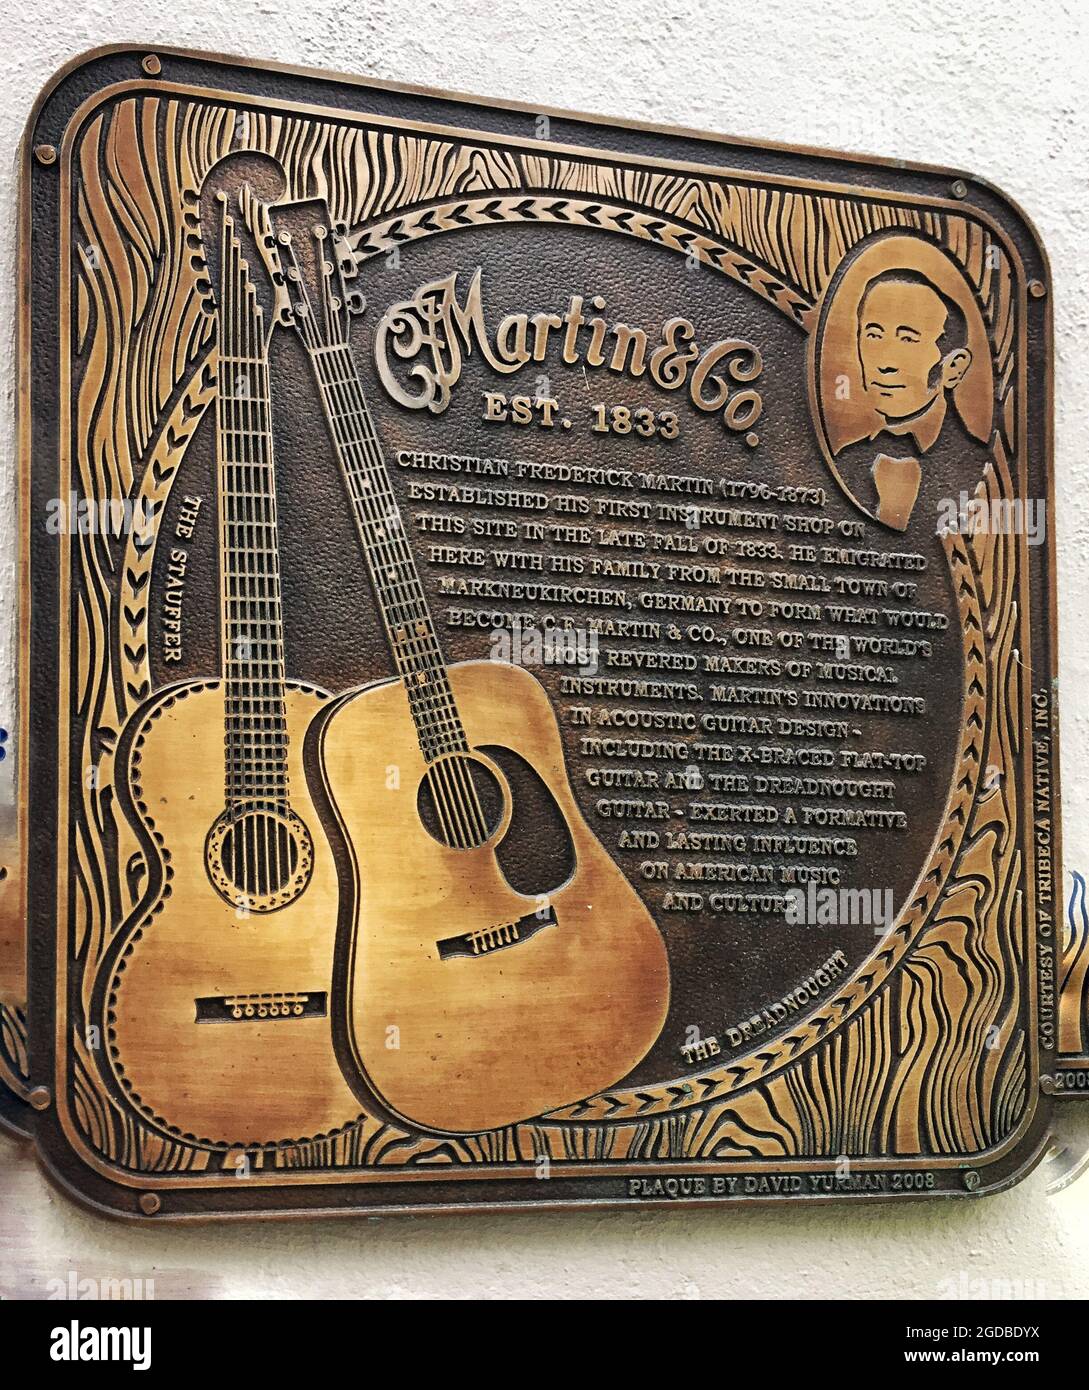 Commemorative plaque outside 196 Hudson Street, NYC, first guitar shop of  Martin & Co Stock Photo - Alamy